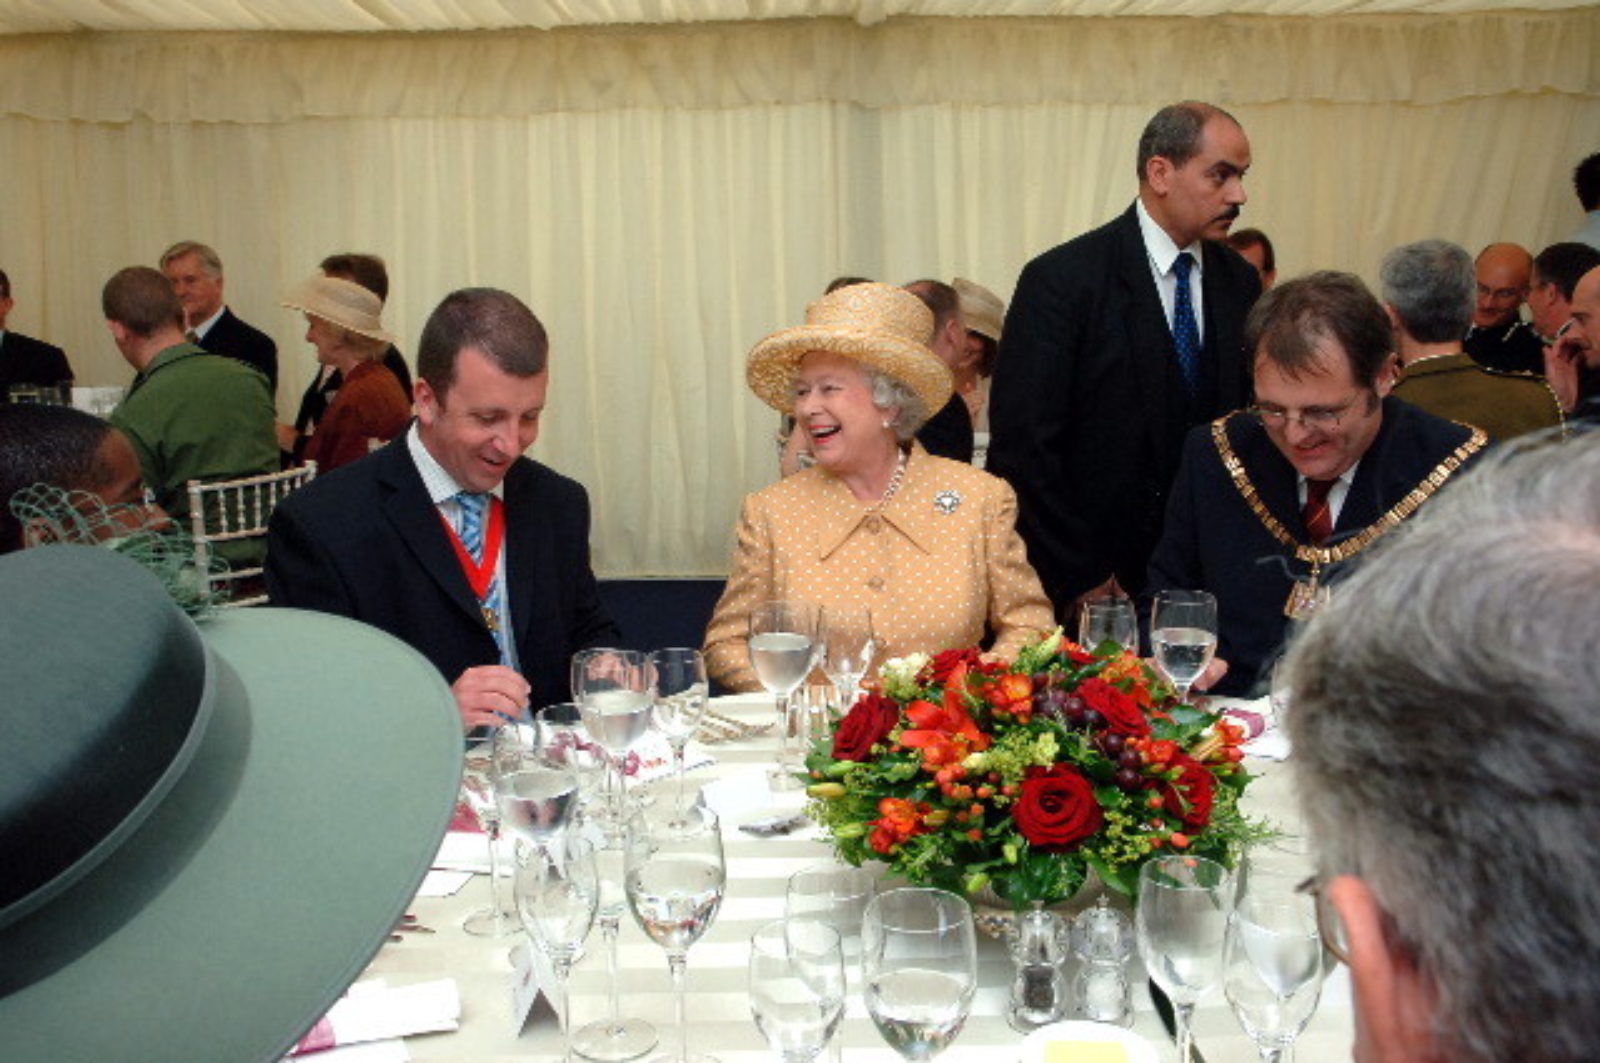 Lunch on the day of Her Majesty’s visit to Bexley in July 2002